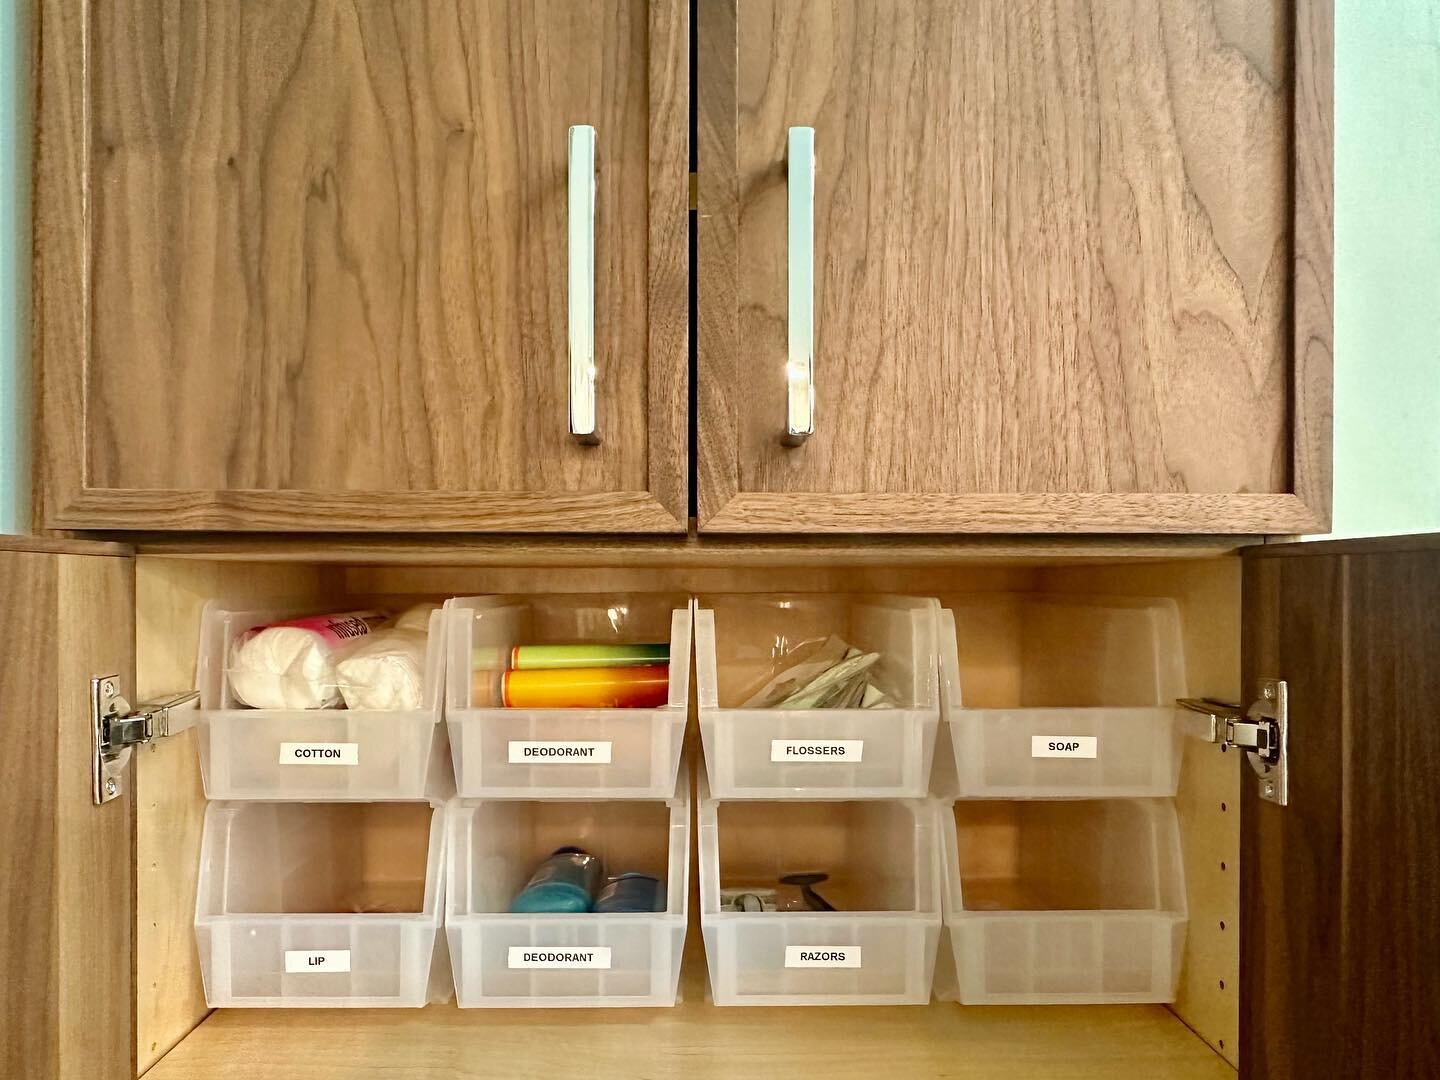 Working with a professional organizer during the planning/design phase can make your organizing dreams 💭come true!! 😘 Let me help you plan your new space so you can start out totally organized in your new room. #organizing #bathroomgoals #organized